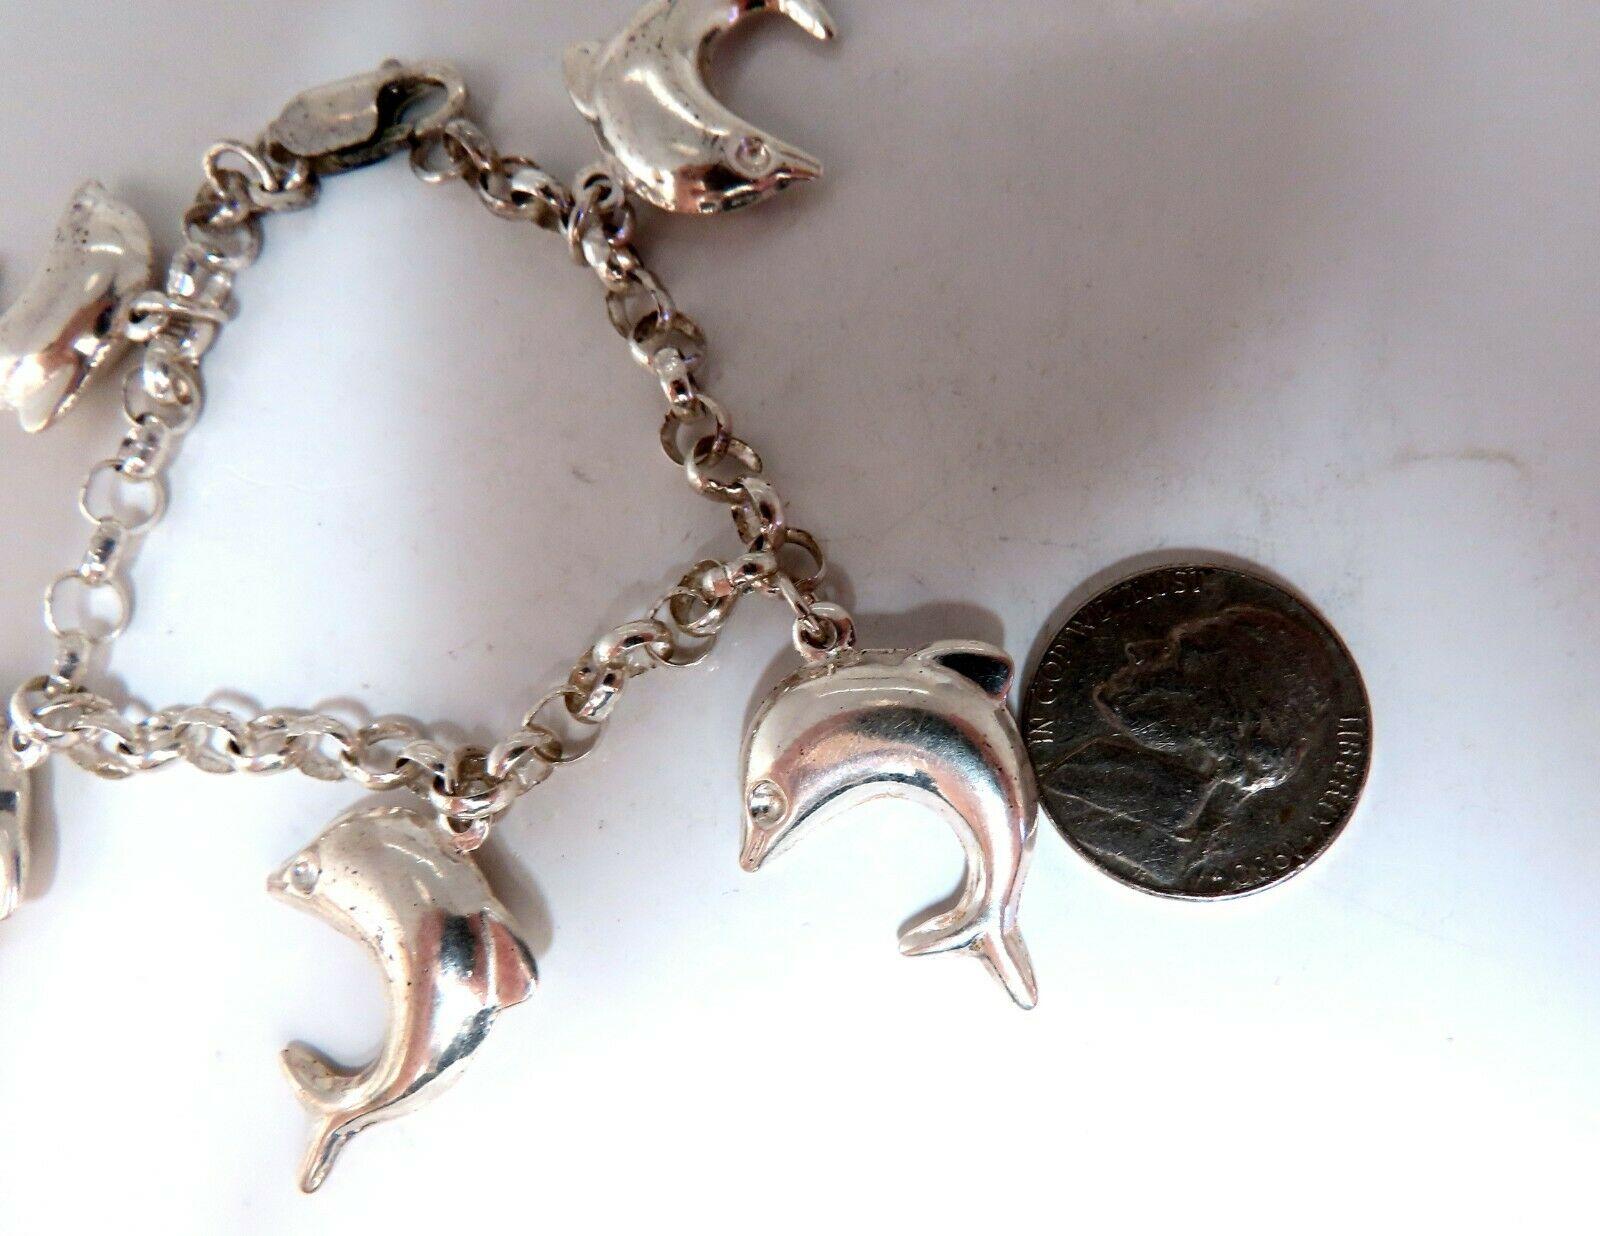 Sterling Silver Dolphins Charms Link Bracelet

7.5 Inch

5 Dolphins / 19 x 28mm

19.1 Grams